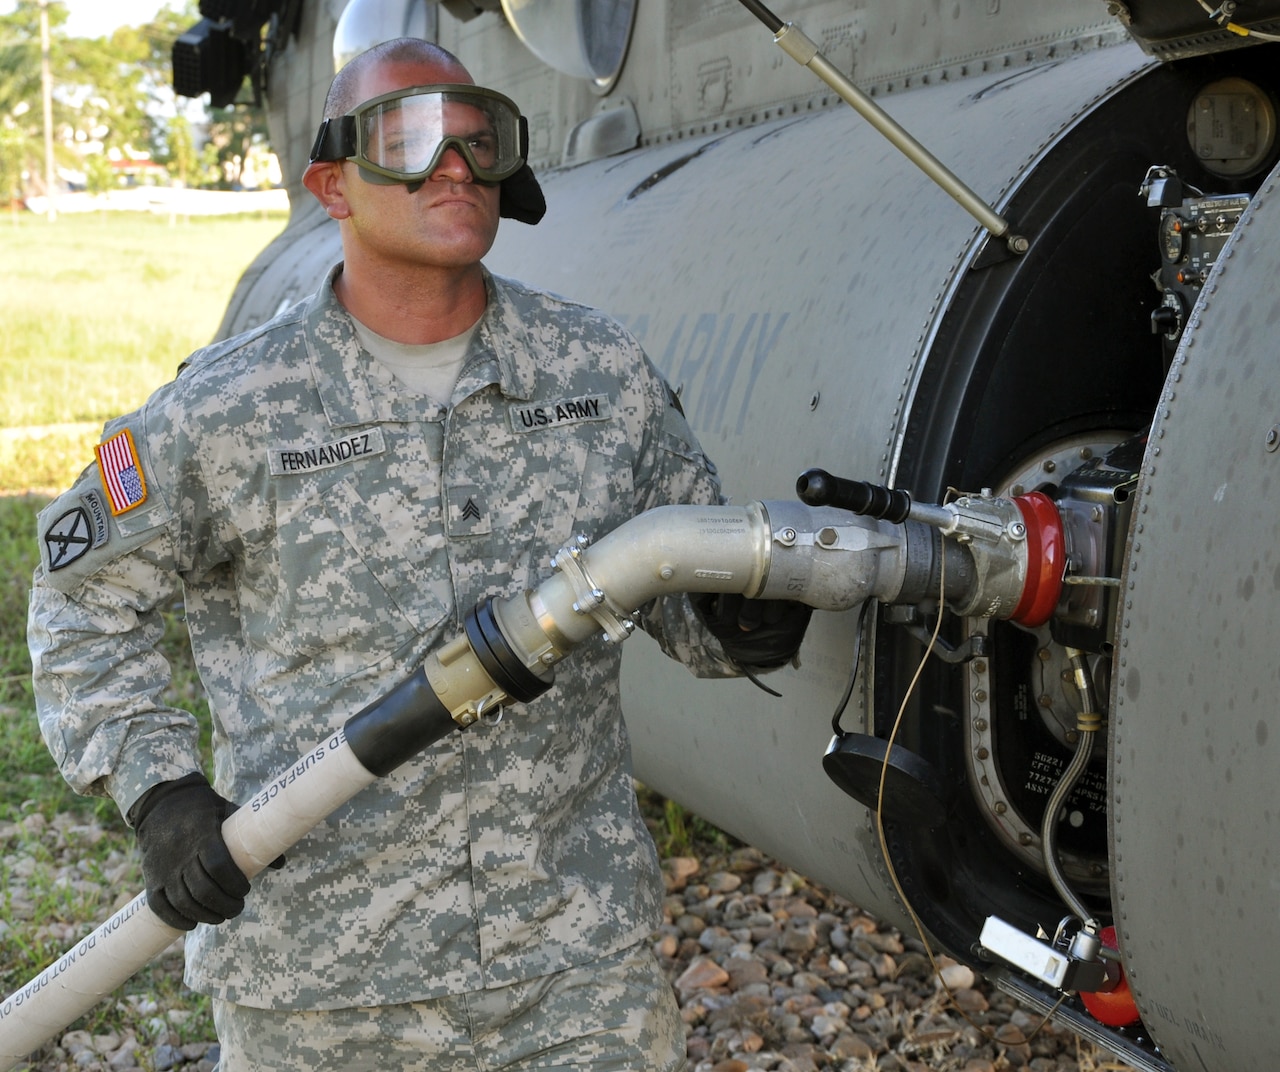 Army Sgt. Erick Fernandez refuels a UH-60 Black Hawk helicopter assigned to the 1-228th Aviation Regiment at Puerto Castilla, Honduras, Nov. 19, 2013. Fernandez spent a year stationed in Honduras before becoming a recruiter with Phoenix Recruiting Battalion. Air Force photo by Capt. Zach Anderson